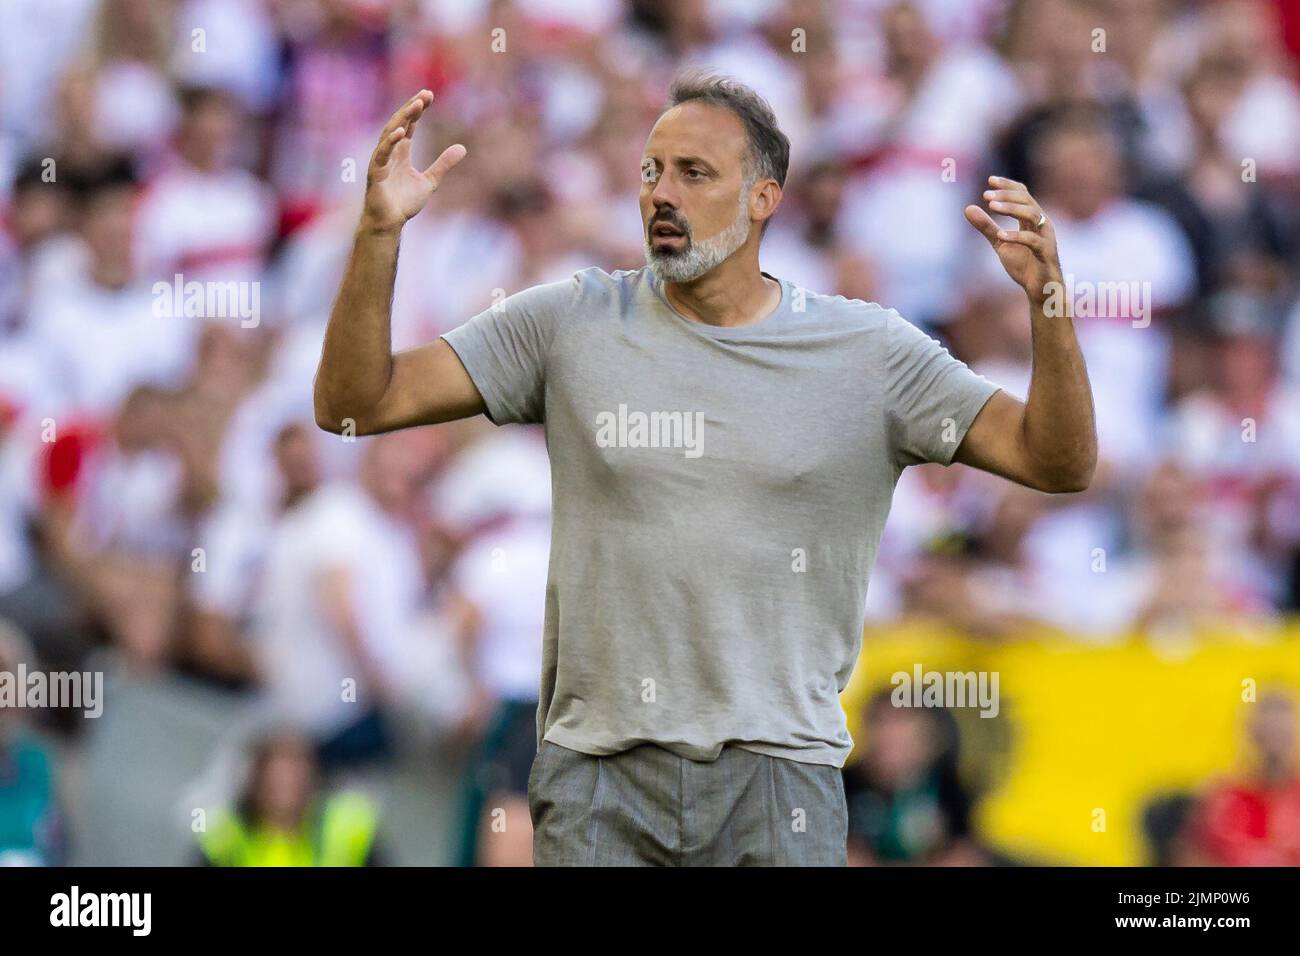 07 August 2022, Baden-Wuerttemberg, Stuttgart: Soccer: Bundesliga, VfB Stuttgart - RB Leipzig, Matchday 1, Mercedes-Benz Arena. Stuttgart's coach Pellegrino Matarazzo gestures. Photo: Tom Weller/dpa - IMPORTANT NOTE: In accordance with the requirements of the DFL Deutsche Fußball Liga and the DFB Deutscher Fußball-Bund, it is prohibited to use or have used photographs taken in the stadium and/or of the match in the form of sequence pictures and/or video-like photo series. Stock Photo